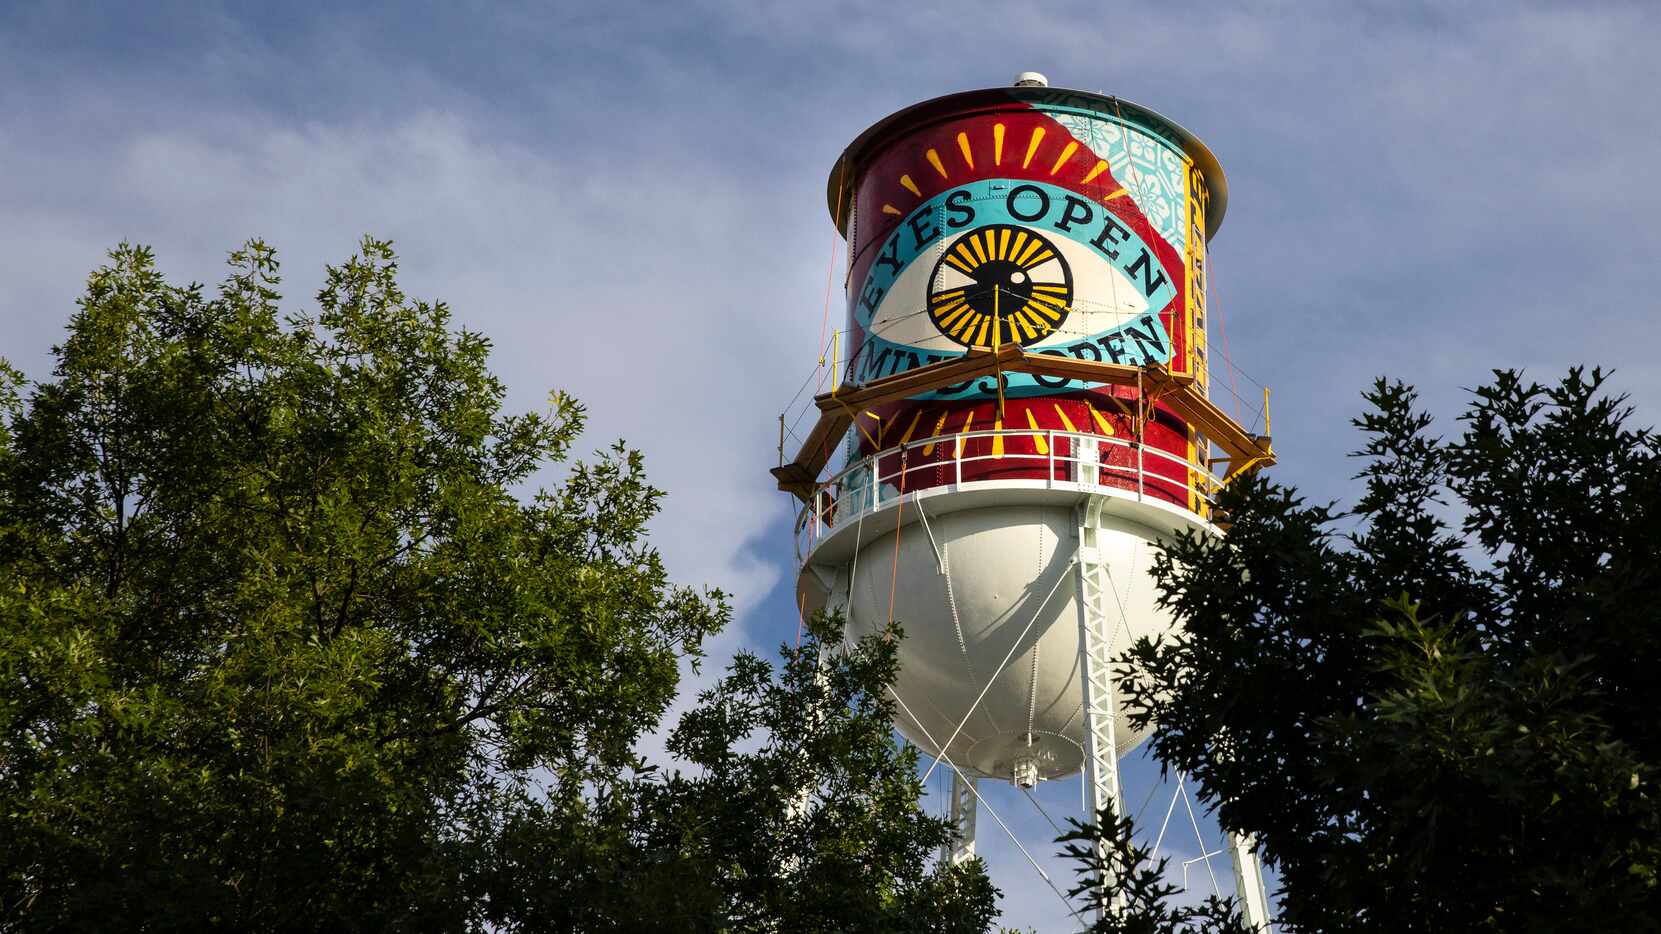 A new mural by Shepard Fairey appears on the side of a water tower by the Continental Gin...